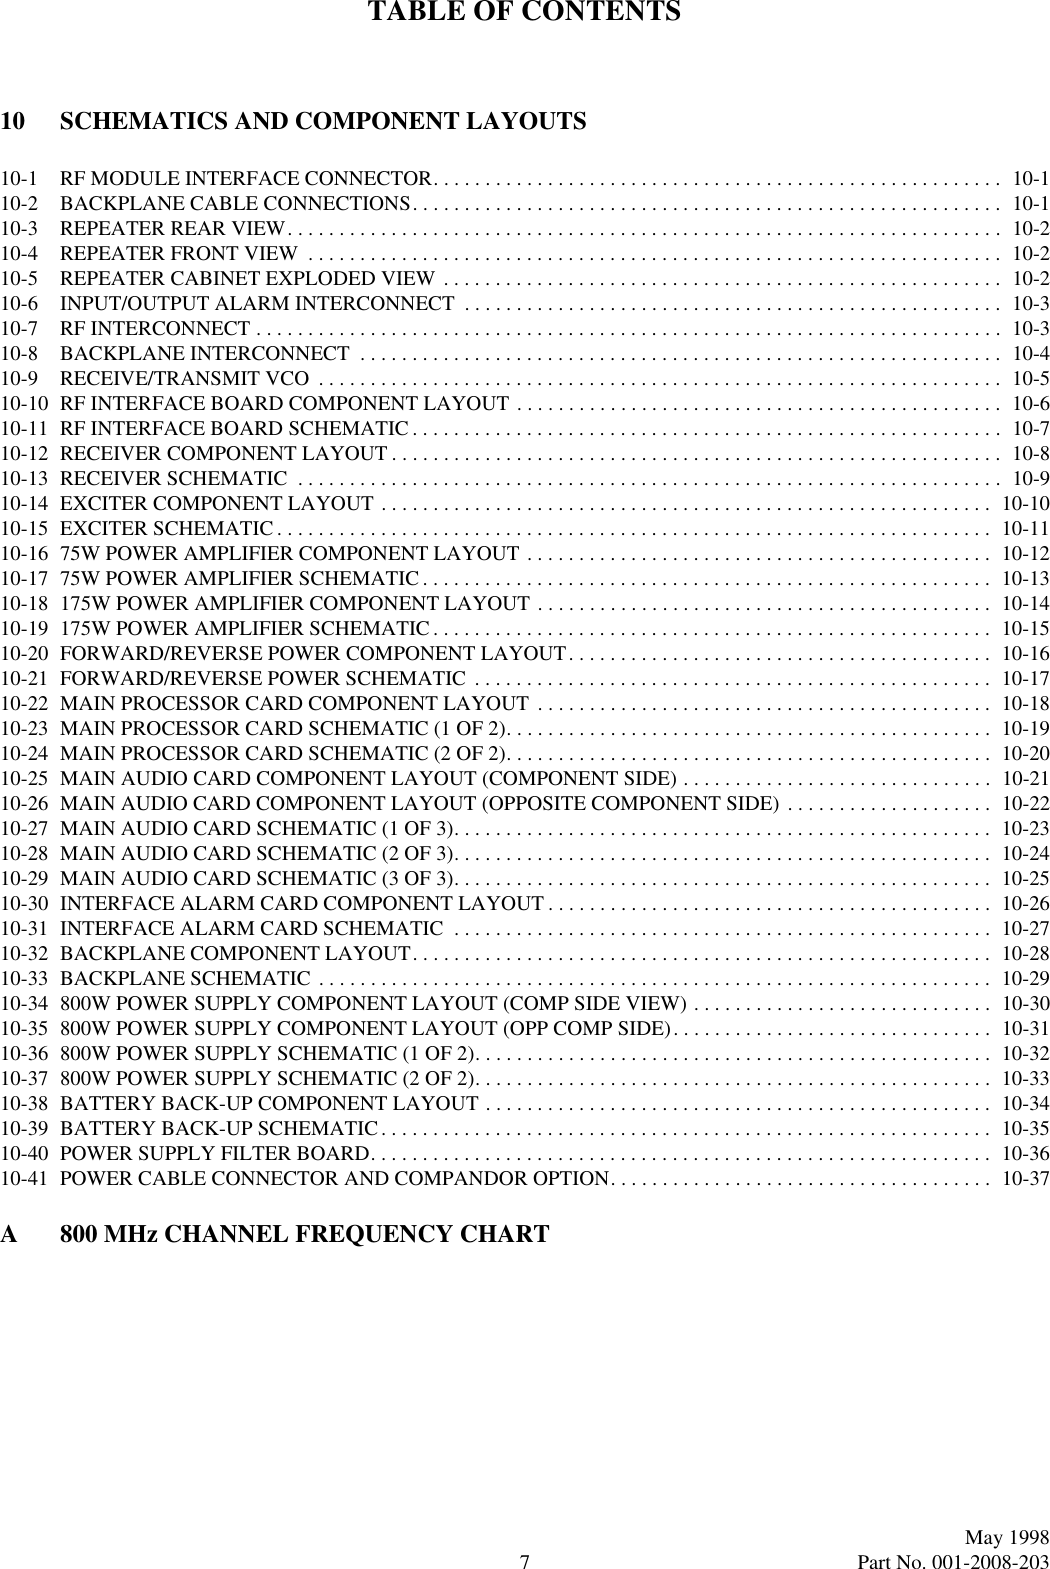 TABLE OF CONTENTS7May 1998Part No. 001-2008-20310 SCHEMATICS AND COMPONENT LAYOUTS10-1 RF MODULE INTERFACE CONNECTOR. . . . . . . . . . . . . . . . . . . . . . . . . . . . . . . . . . . . . . . . . . . . . . . . . . . . . . .  10-110-2 BACKPLANE CABLE CONNECTIONS. . . . . . . . . . . . . . . . . . . . . . . . . . . . . . . . . . . . . . . . . . . . . . . . . . . . . . . . .  10-110-3 REPEATER REAR VIEW. . . . . . . . . . . . . . . . . . . . . . . . . . . . . . . . . . . . . . . . . . . . . . . . . . . . . . . . . . . . . . . . . . . . .  10-210-4 REPEATER FRONT VIEW  . . . . . . . . . . . . . . . . . . . . . . . . . . . . . . . . . . . . . . . . . . . . . . . . . . . . . . . . . . . . . . . . . . .  10-210-5 REPEATER CABINET EXPLODED VIEW . . . . . . . . . . . . . . . . . . . . . . . . . . . . . . . . . . . . . . . . . . . . . . . . . . . . . .  10-210-6 INPUT/OUTPUT ALARM INTERCONNECT  . . . . . . . . . . . . . . . . . . . . . . . . . . . . . . . . . . . . . . . . . . . . . . . . . . . .  10-310-7 RF INTERCONNECT . . . . . . . . . . . . . . . . . . . . . . . . . . . . . . . . . . . . . . . . . . . . . . . . . . . . . . . . . . . . . . . . . . . . . . . .  10-310-8 BACKPLANE INTERCONNECT  . . . . . . . . . . . . . . . . . . . . . . . . . . . . . . . . . . . . . . . . . . . . . . . . . . . . . . . . . . . . . .  10-410-9 RECEIVE/TRANSMIT VCO  . . . . . . . . . . . . . . . . . . . . . . . . . . . . . . . . . . . . . . . . . . . . . . . . . . . . . . . . . . . . . . . . . .  10-510-10 RF INTERFACE BOARD COMPONENT LAYOUT . . . . . . . . . . . . . . . . . . . . . . . . . . . . . . . . . . . . . . . . . . . . . . .  10-610-11 RF INTERFACE BOARD SCHEMATIC . . . . . . . . . . . . . . . . . . . . . . . . . . . . . . . . . . . . . . . . . . . . . . . . . . . . . . . . .  10-710-12 RECEIVER COMPONENT LAYOUT . . . . . . . . . . . . . . . . . . . . . . . . . . . . . . . . . . . . . . . . . . . . . . . . . . . . . . . . . . .  10-810-13 RECEIVER SCHEMATIC  . . . . . . . . . . . . . . . . . . . . . . . . . . . . . . . . . . . . . . . . . . . . . . . . . . . . . . . . . . . . . . . . . . . .  10-910-14 EXCITER COMPONENT LAYOUT . . . . . . . . . . . . . . . . . . . . . . . . . . . . . . . . . . . . . . . . . . . . . . . . . . . . . . . . . . .  10-1010-15 EXCITER SCHEMATIC. . . . . . . . . . . . . . . . . . . . . . . . . . . . . . . . . . . . . . . . . . . . . . . . . . . . . . . . . . . . . . . . . . . . .  10-1110-16 75W POWER AMPLIFIER COMPONENT LAYOUT . . . . . . . . . . . . . . . . . . . . . . . . . . . . . . . . . . . . . . . . . . . . .  10-1210-17 75W POWER AMPLIFIER SCHEMATIC . . . . . . . . . . . . . . . . . . . . . . . . . . . . . . . . . . . . . . . . . . . . . . . . . . . . . . .  10-1310-18 175W POWER AMPLIFIER COMPONENT LAYOUT . . . . . . . . . . . . . . . . . . . . . . . . . . . . . . . . . . . . . . . . . . . .  10-1410-19 175W POWER AMPLIFIER SCHEMATIC. . . . . . . . . . . . . . . . . . . . . . . . . . . . . . . . . . . . . . . . . . . . . . . . . . . . . .  10-1510-20 FORWARD/REVERSE POWER COMPONENT LAYOUT. . . . . . . . . . . . . . . . . . . . . . . . . . . . . . . . . . . . . . . . .  10-1610-21 FORWARD/REVERSE POWER SCHEMATIC  . . . . . . . . . . . . . . . . . . . . . . . . . . . . . . . . . . . . . . . . . . . . . . . . . .  10-1710-22 MAIN PROCESSOR CARD COMPONENT LAYOUT  . . . . . . . . . . . . . . . . . . . . . . . . . . . . . . . . . . . . . . . . . . . .  10-1810-23 MAIN PROCESSOR CARD SCHEMATIC (1 OF 2). . . . . . . . . . . . . . . . . . . . . . . . . . . . . . . . . . . . . . . . . . . . . . .  10-1910-24 MAIN PROCESSOR CARD SCHEMATIC (2 OF 2). . . . . . . . . . . . . . . . . . . . . . . . . . . . . . . . . . . . . . . . . . . . . . .  10-2010-25 MAIN AUDIO CARD COMPONENT LAYOUT (COMPONENT SIDE) . . . . . . . . . . . . . . . . . . . . . . . . . . . . . .  10-2110-26 MAIN AUDIO CARD COMPONENT LAYOUT (OPPOSITE COMPONENT SIDE) . . . . . . . . . . . . . . . . . . . .  10-2210-27 MAIN AUDIO CARD SCHEMATIC (1 OF 3). . . . . . . . . . . . . . . . . . . . . . . . . . . . . . . . . . . . . . . . . . . . . . . . . . . .  10-2310-28 MAIN AUDIO CARD SCHEMATIC (2 OF 3). . . . . . . . . . . . . . . . . . . . . . . . . . . . . . . . . . . . . . . . . . . . . . . . . . . .  10-2410-29 MAIN AUDIO CARD SCHEMATIC (3 OF 3). . . . . . . . . . . . . . . . . . . . . . . . . . . . . . . . . . . . . . . . . . . . . . . . . . . .  10-2510-30 INTERFACE ALARM CARD COMPONENT LAYOUT . . . . . . . . . . . . . . . . . . . . . . . . . . . . . . . . . . . . . . . . . . .  10-2610-31 INTERFACE ALARM CARD SCHEMATIC  . . . . . . . . . . . . . . . . . . . . . . . . . . . . . . . . . . . . . . . . . . . . . . . . . . . .  10-2710-32 BACKPLANE COMPONENT LAYOUT. . . . . . . . . . . . . . . . . . . . . . . . . . . . . . . . . . . . . . . . . . . . . . . . . . . . . . . .  10-2810-33 BACKPLANE SCHEMATIC . . . . . . . . . . . . . . . . . . . . . . . . . . . . . . . . . . . . . . . . . . . . . . . . . . . . . . . . . . . . . . . . .  10-2910-34 800W POWER SUPPLY COMPONENT LAYOUT (COMP SIDE VIEW) . . . . . . . . . . . . . . . . . . . . . . . . . . . . .  10-3010-35 800W POWER SUPPLY COMPONENT LAYOUT (OPP COMP SIDE). . . . . . . . . . . . . . . . . . . . . . . . . . . . . . .  10-3110-36 800W POWER SUPPLY SCHEMATIC (1 OF 2). . . . . . . . . . . . . . . . . . . . . . . . . . . . . . . . . . . . . . . . . . . . . . . . . .  10-3210-37 800W POWER SUPPLY SCHEMATIC (2 OF 2). . . . . . . . . . . . . . . . . . . . . . . . . . . . . . . . . . . . . . . . . . . . . . . . . .  10-3310-38 BATTERY BACK-UP COMPONENT LAYOUT . . . . . . . . . . . . . . . . . . . . . . . . . . . . . . . . . . . . . . . . . . . . . . . . .  10-3410-39 BATTERY BACK-UP SCHEMATIC. . . . . . . . . . . . . . . . . . . . . . . . . . . . . . . . . . . . . . . . . . . . . . . . . . . . . . . . . . .  10-3510-40 POWER SUPPLY FILTER BOARD. . . . . . . . . . . . . . . . . . . . . . . . . . . . . . . . . . . . . . . . . . . . . . . . . . . . . . . . . . . .  10-3610-41 POWER CABLE CONNECTOR AND COMPANDOR OPTION. . . . . . . . . . . . . . . . . . . . . . . . . . . . . . . . . . . . .  10-37A 800 MHz CHANNEL FREQUENCY CHART